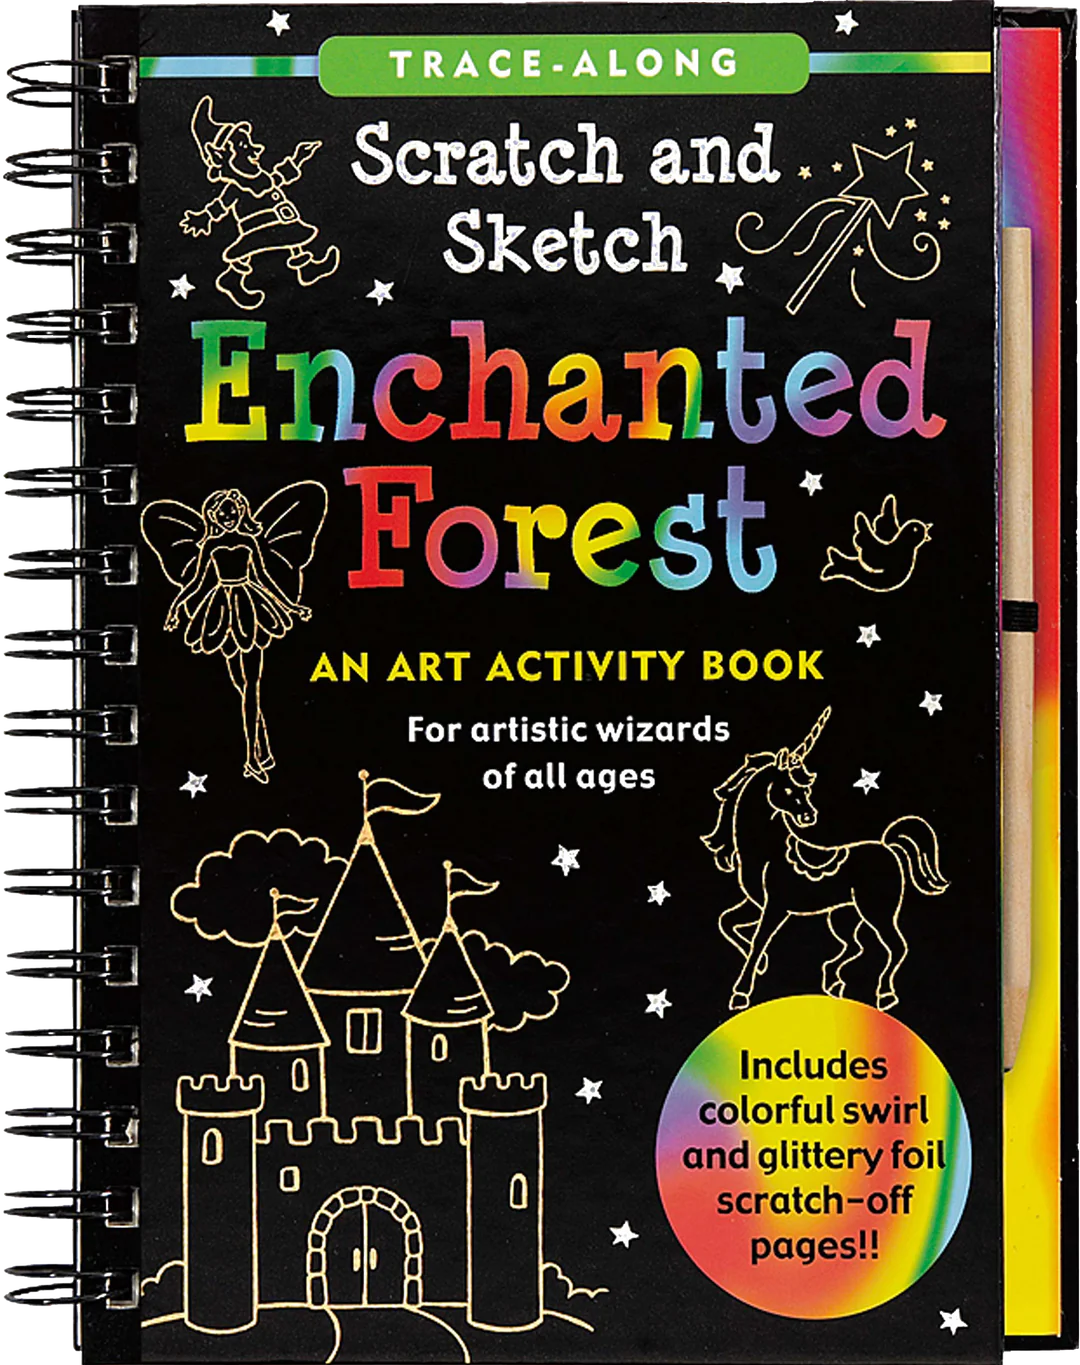 Scratch & Sketch Activity Pad - Enchanted Forest